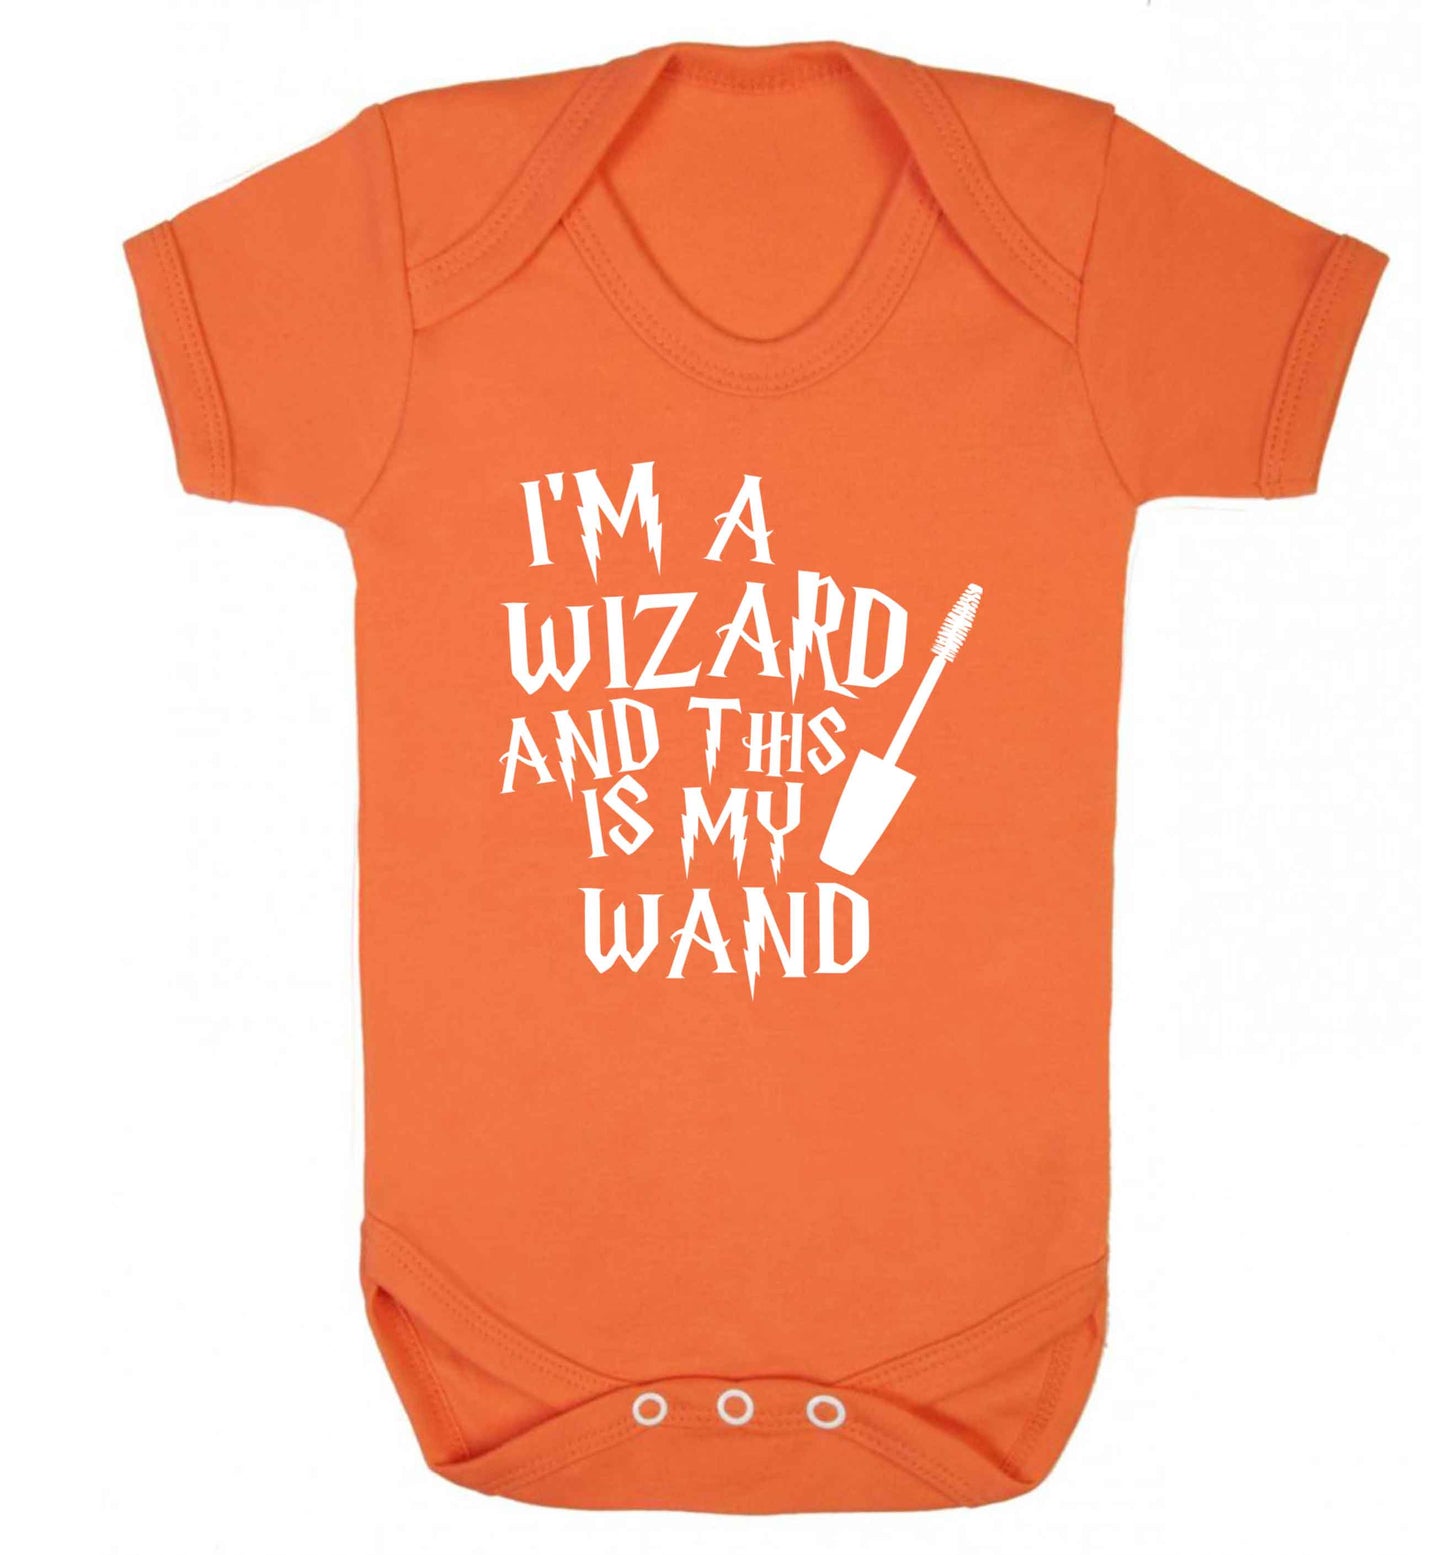 I'm a wizard and this is my wand Baby Vest orange 18-24 months